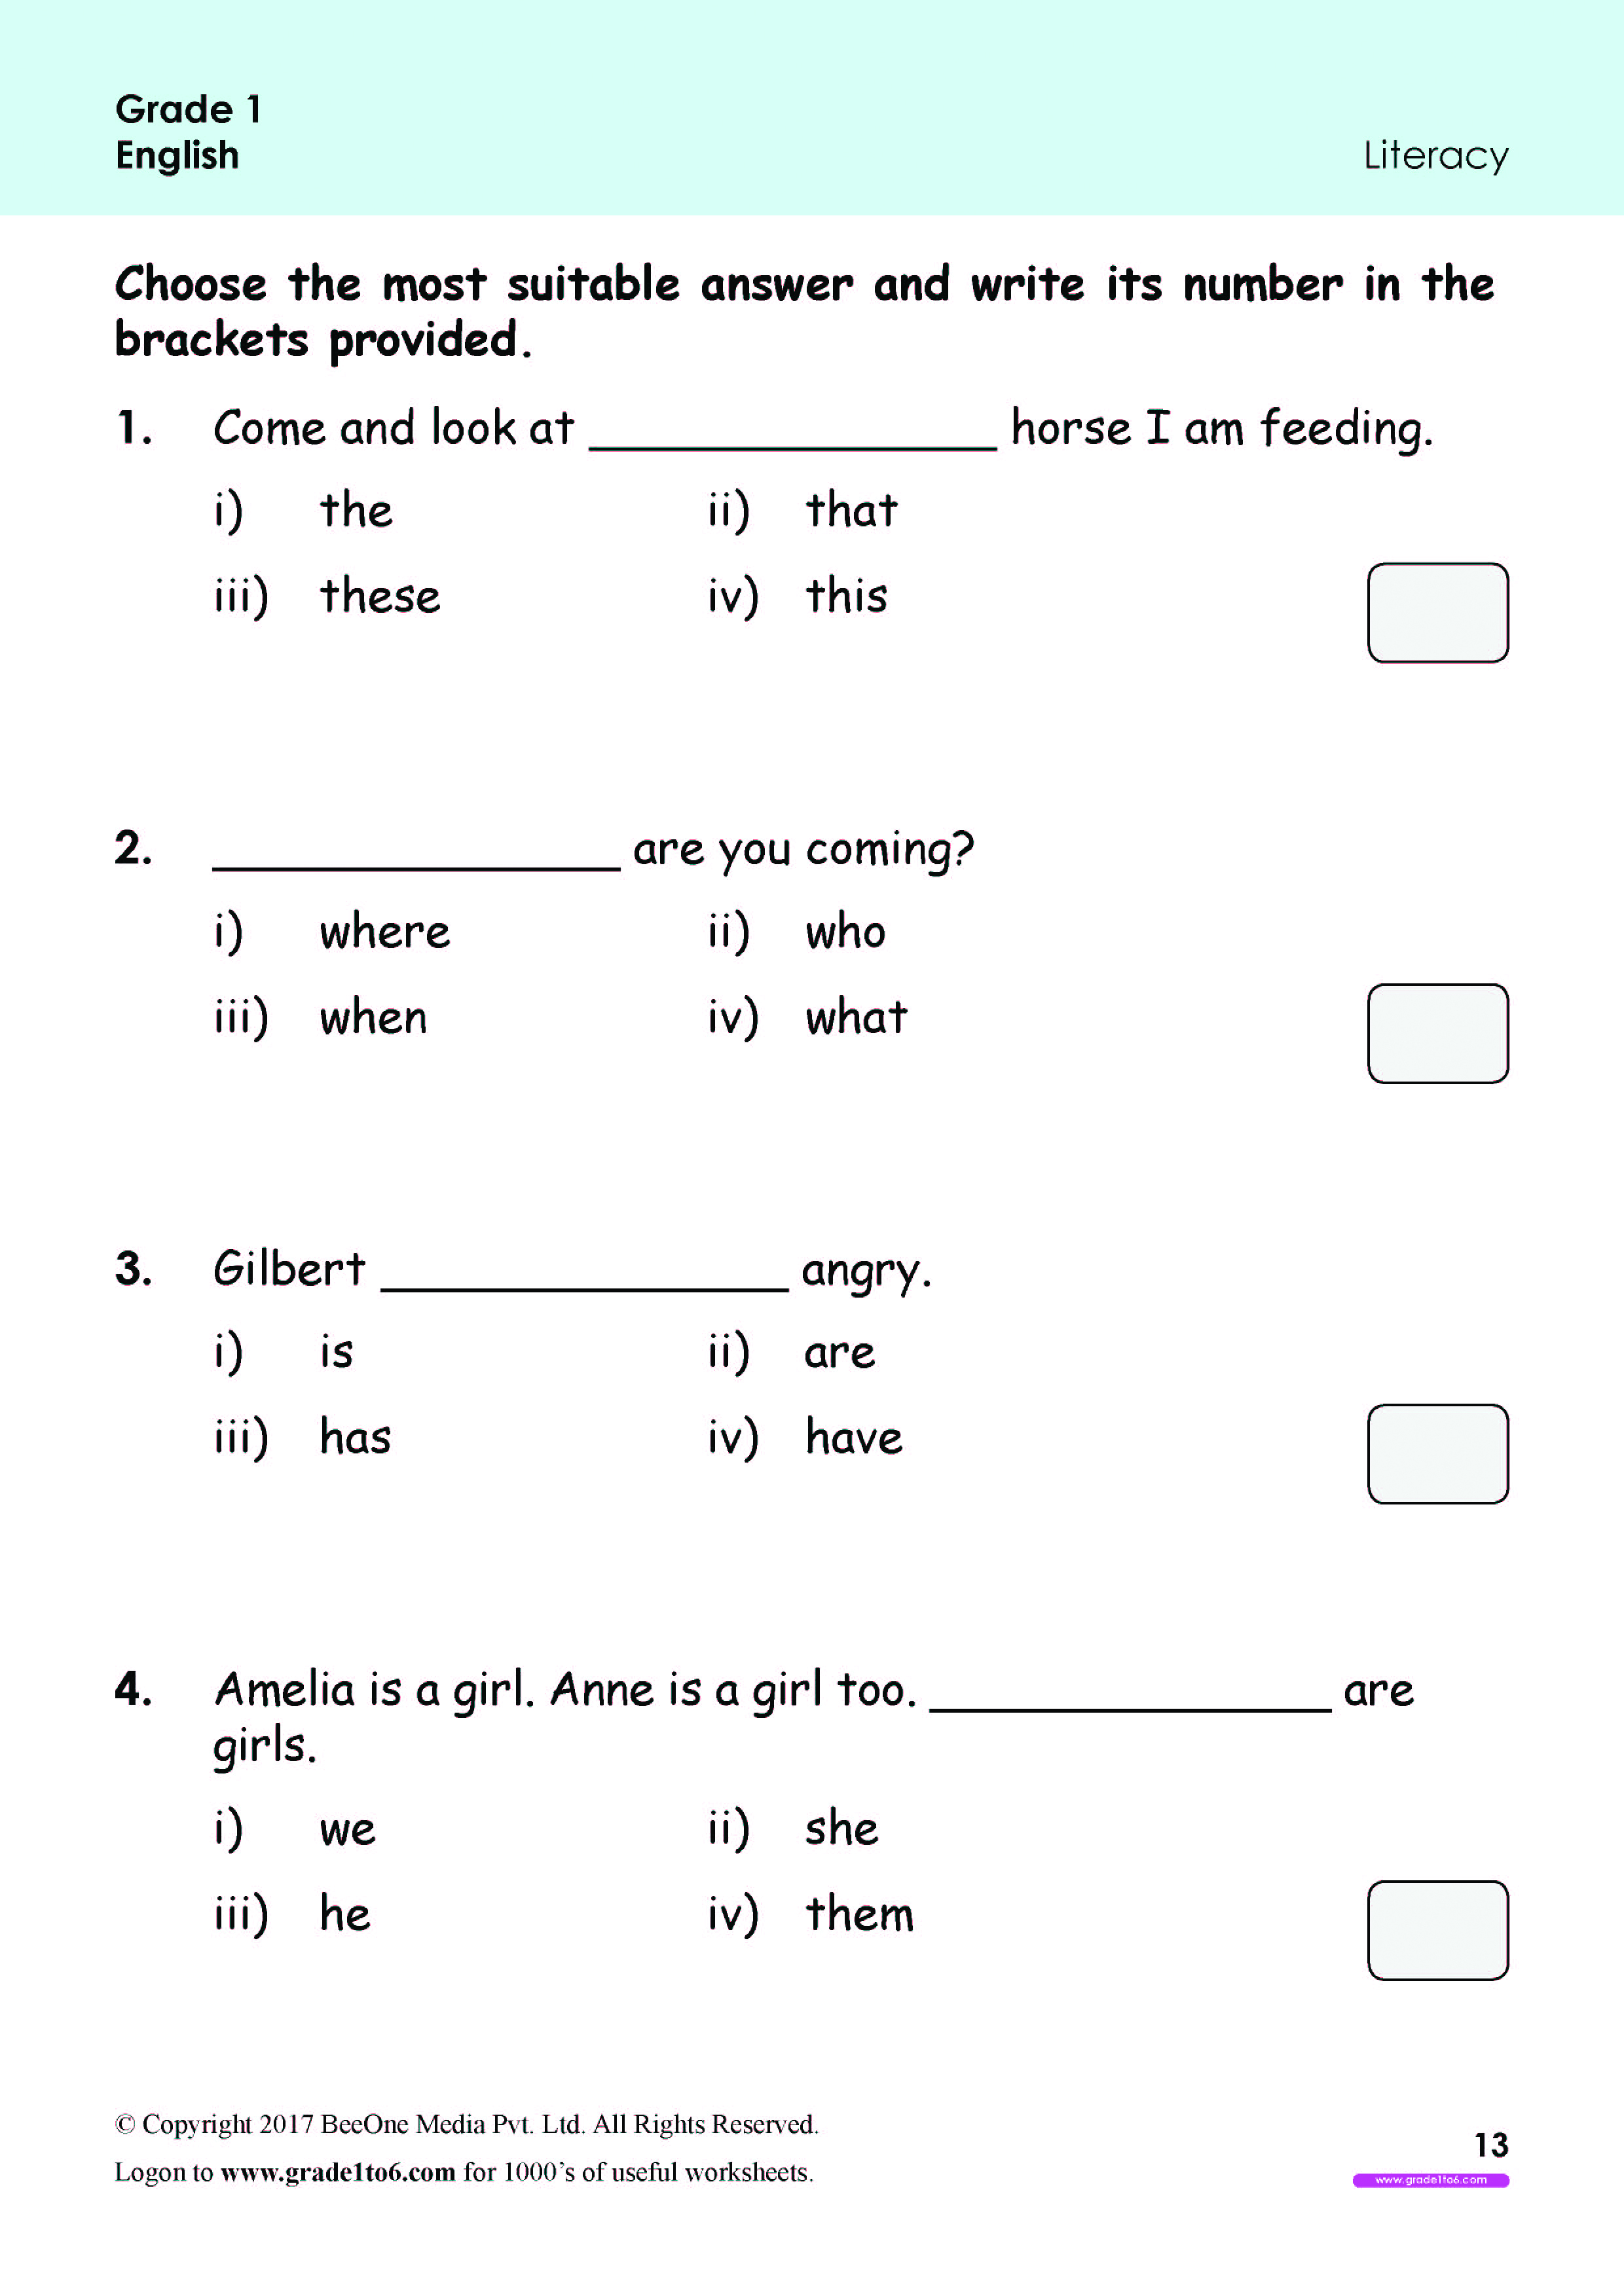 literacy-worksheets-for-grade-1-www-grade1to6